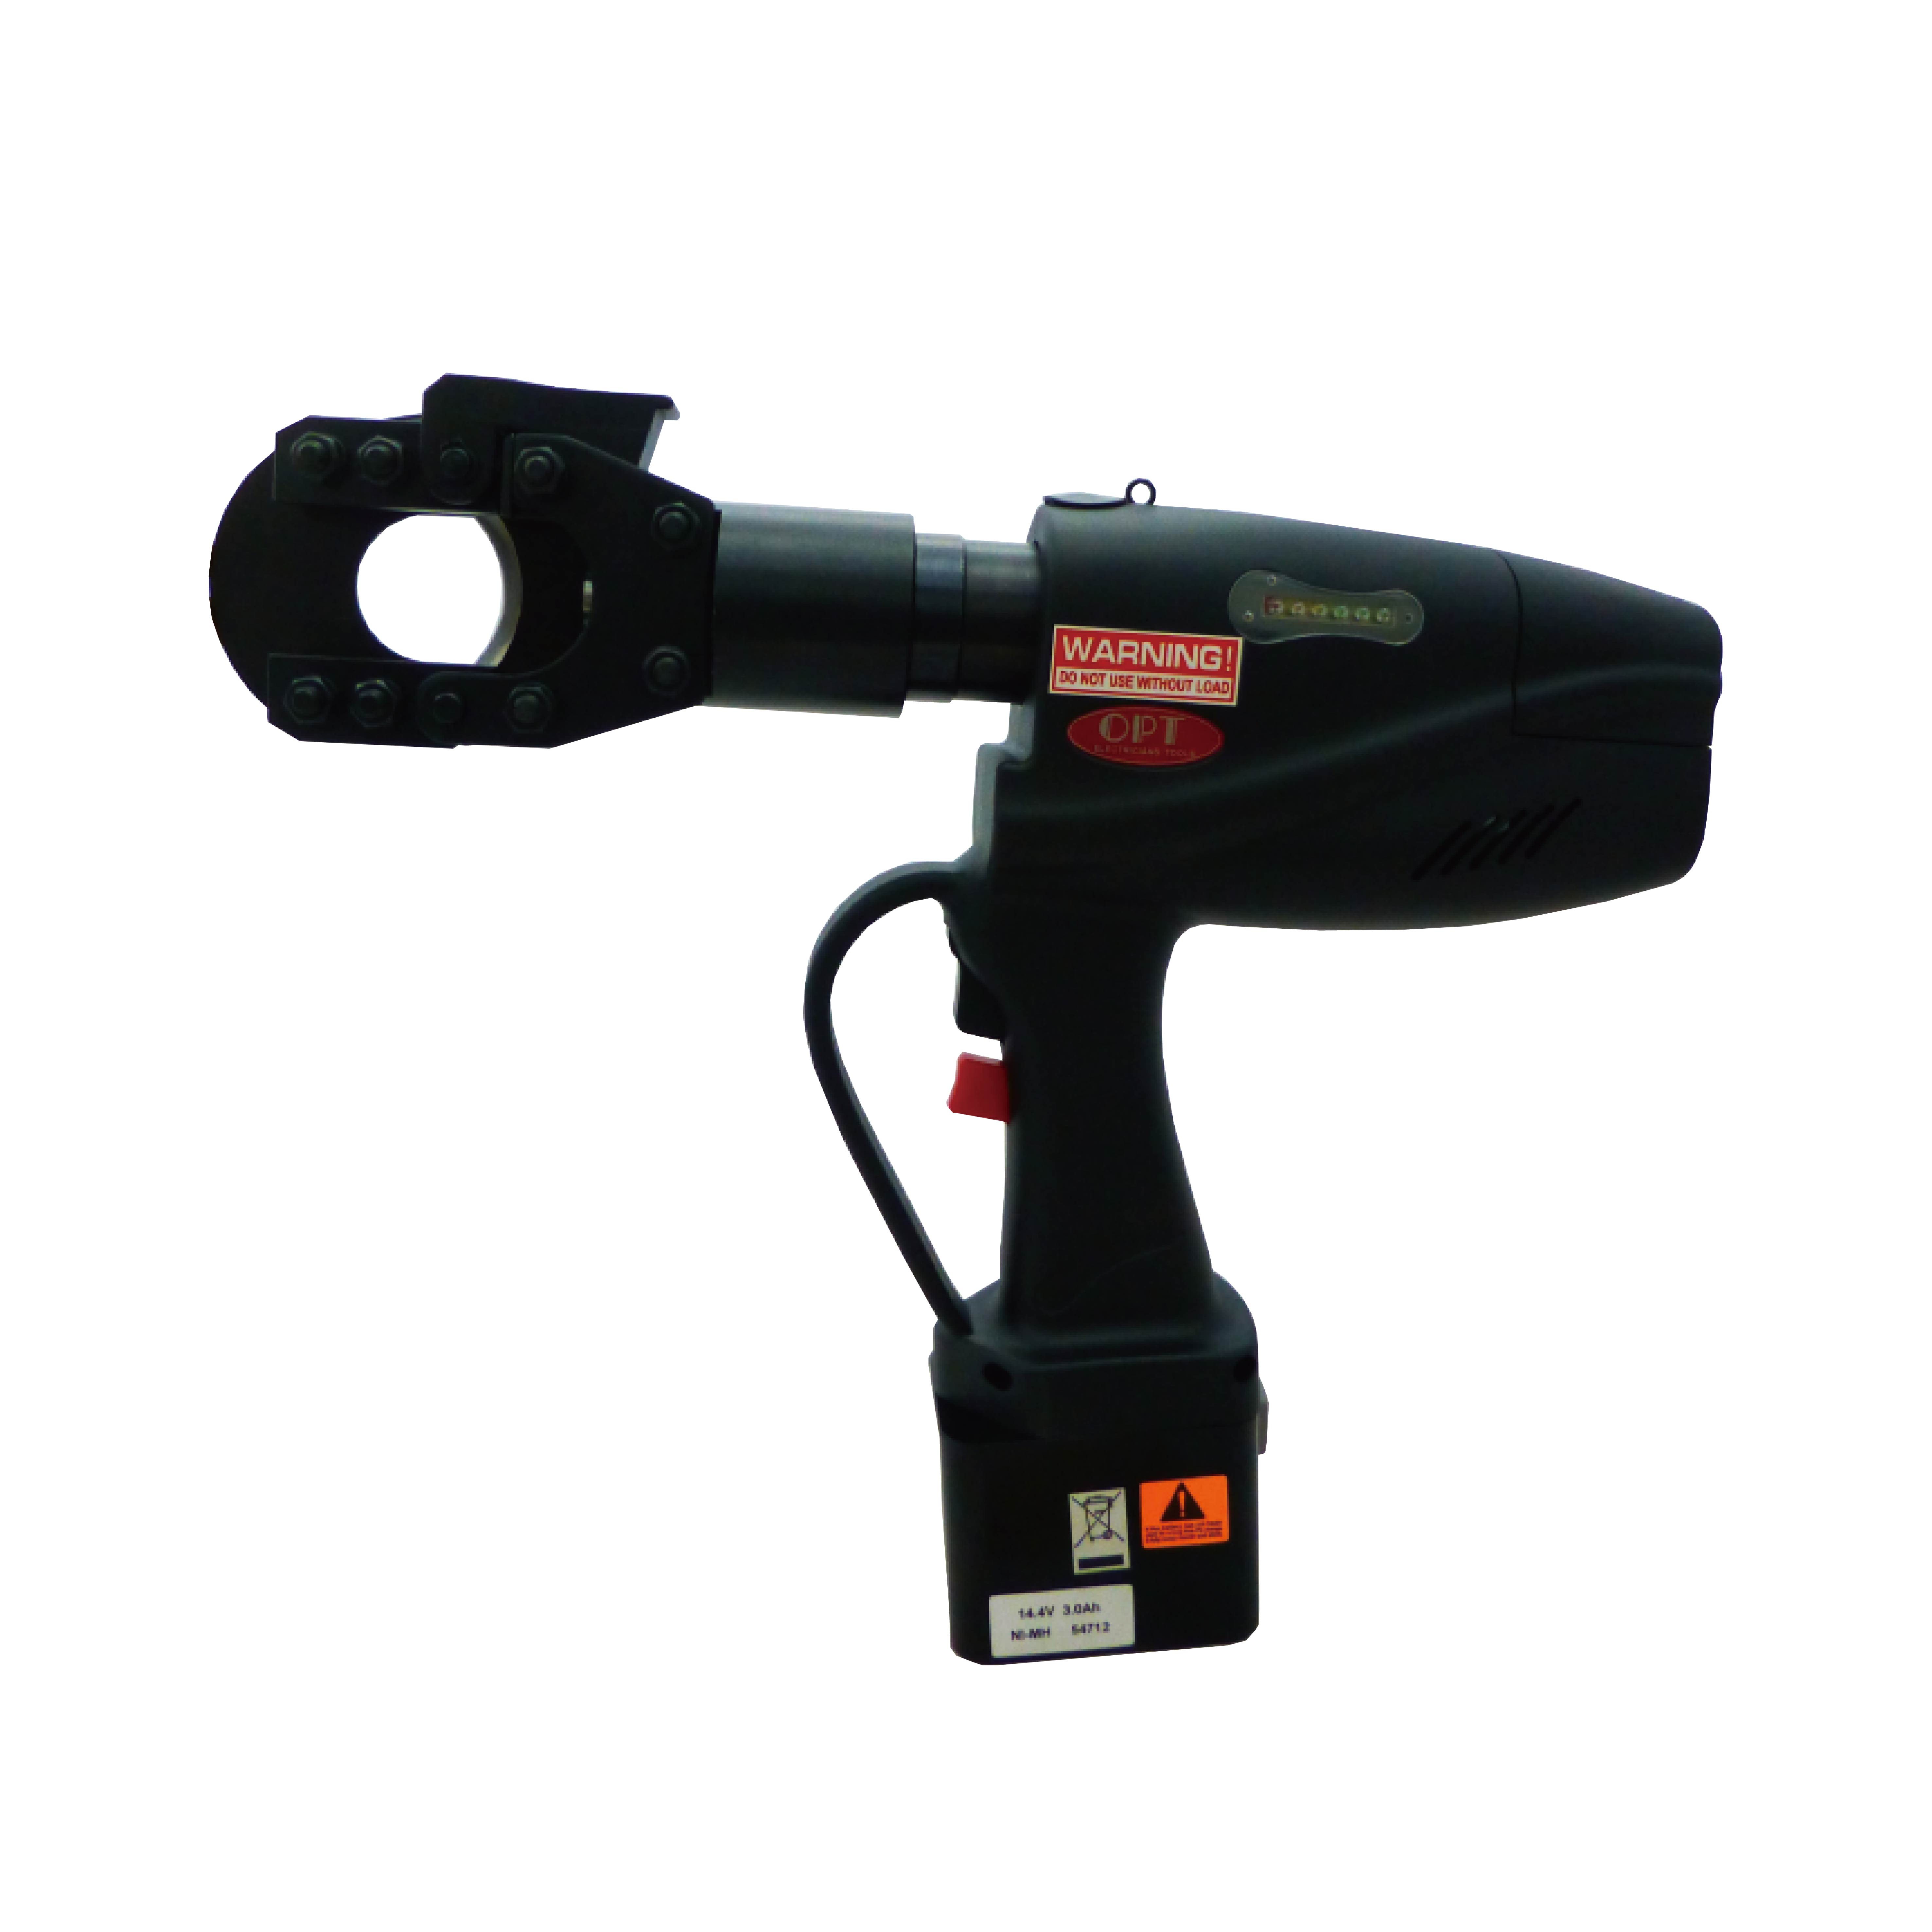 ECL-40 CORDLESS HYDRAULIC CABLE CUTTERS-ECL-40A